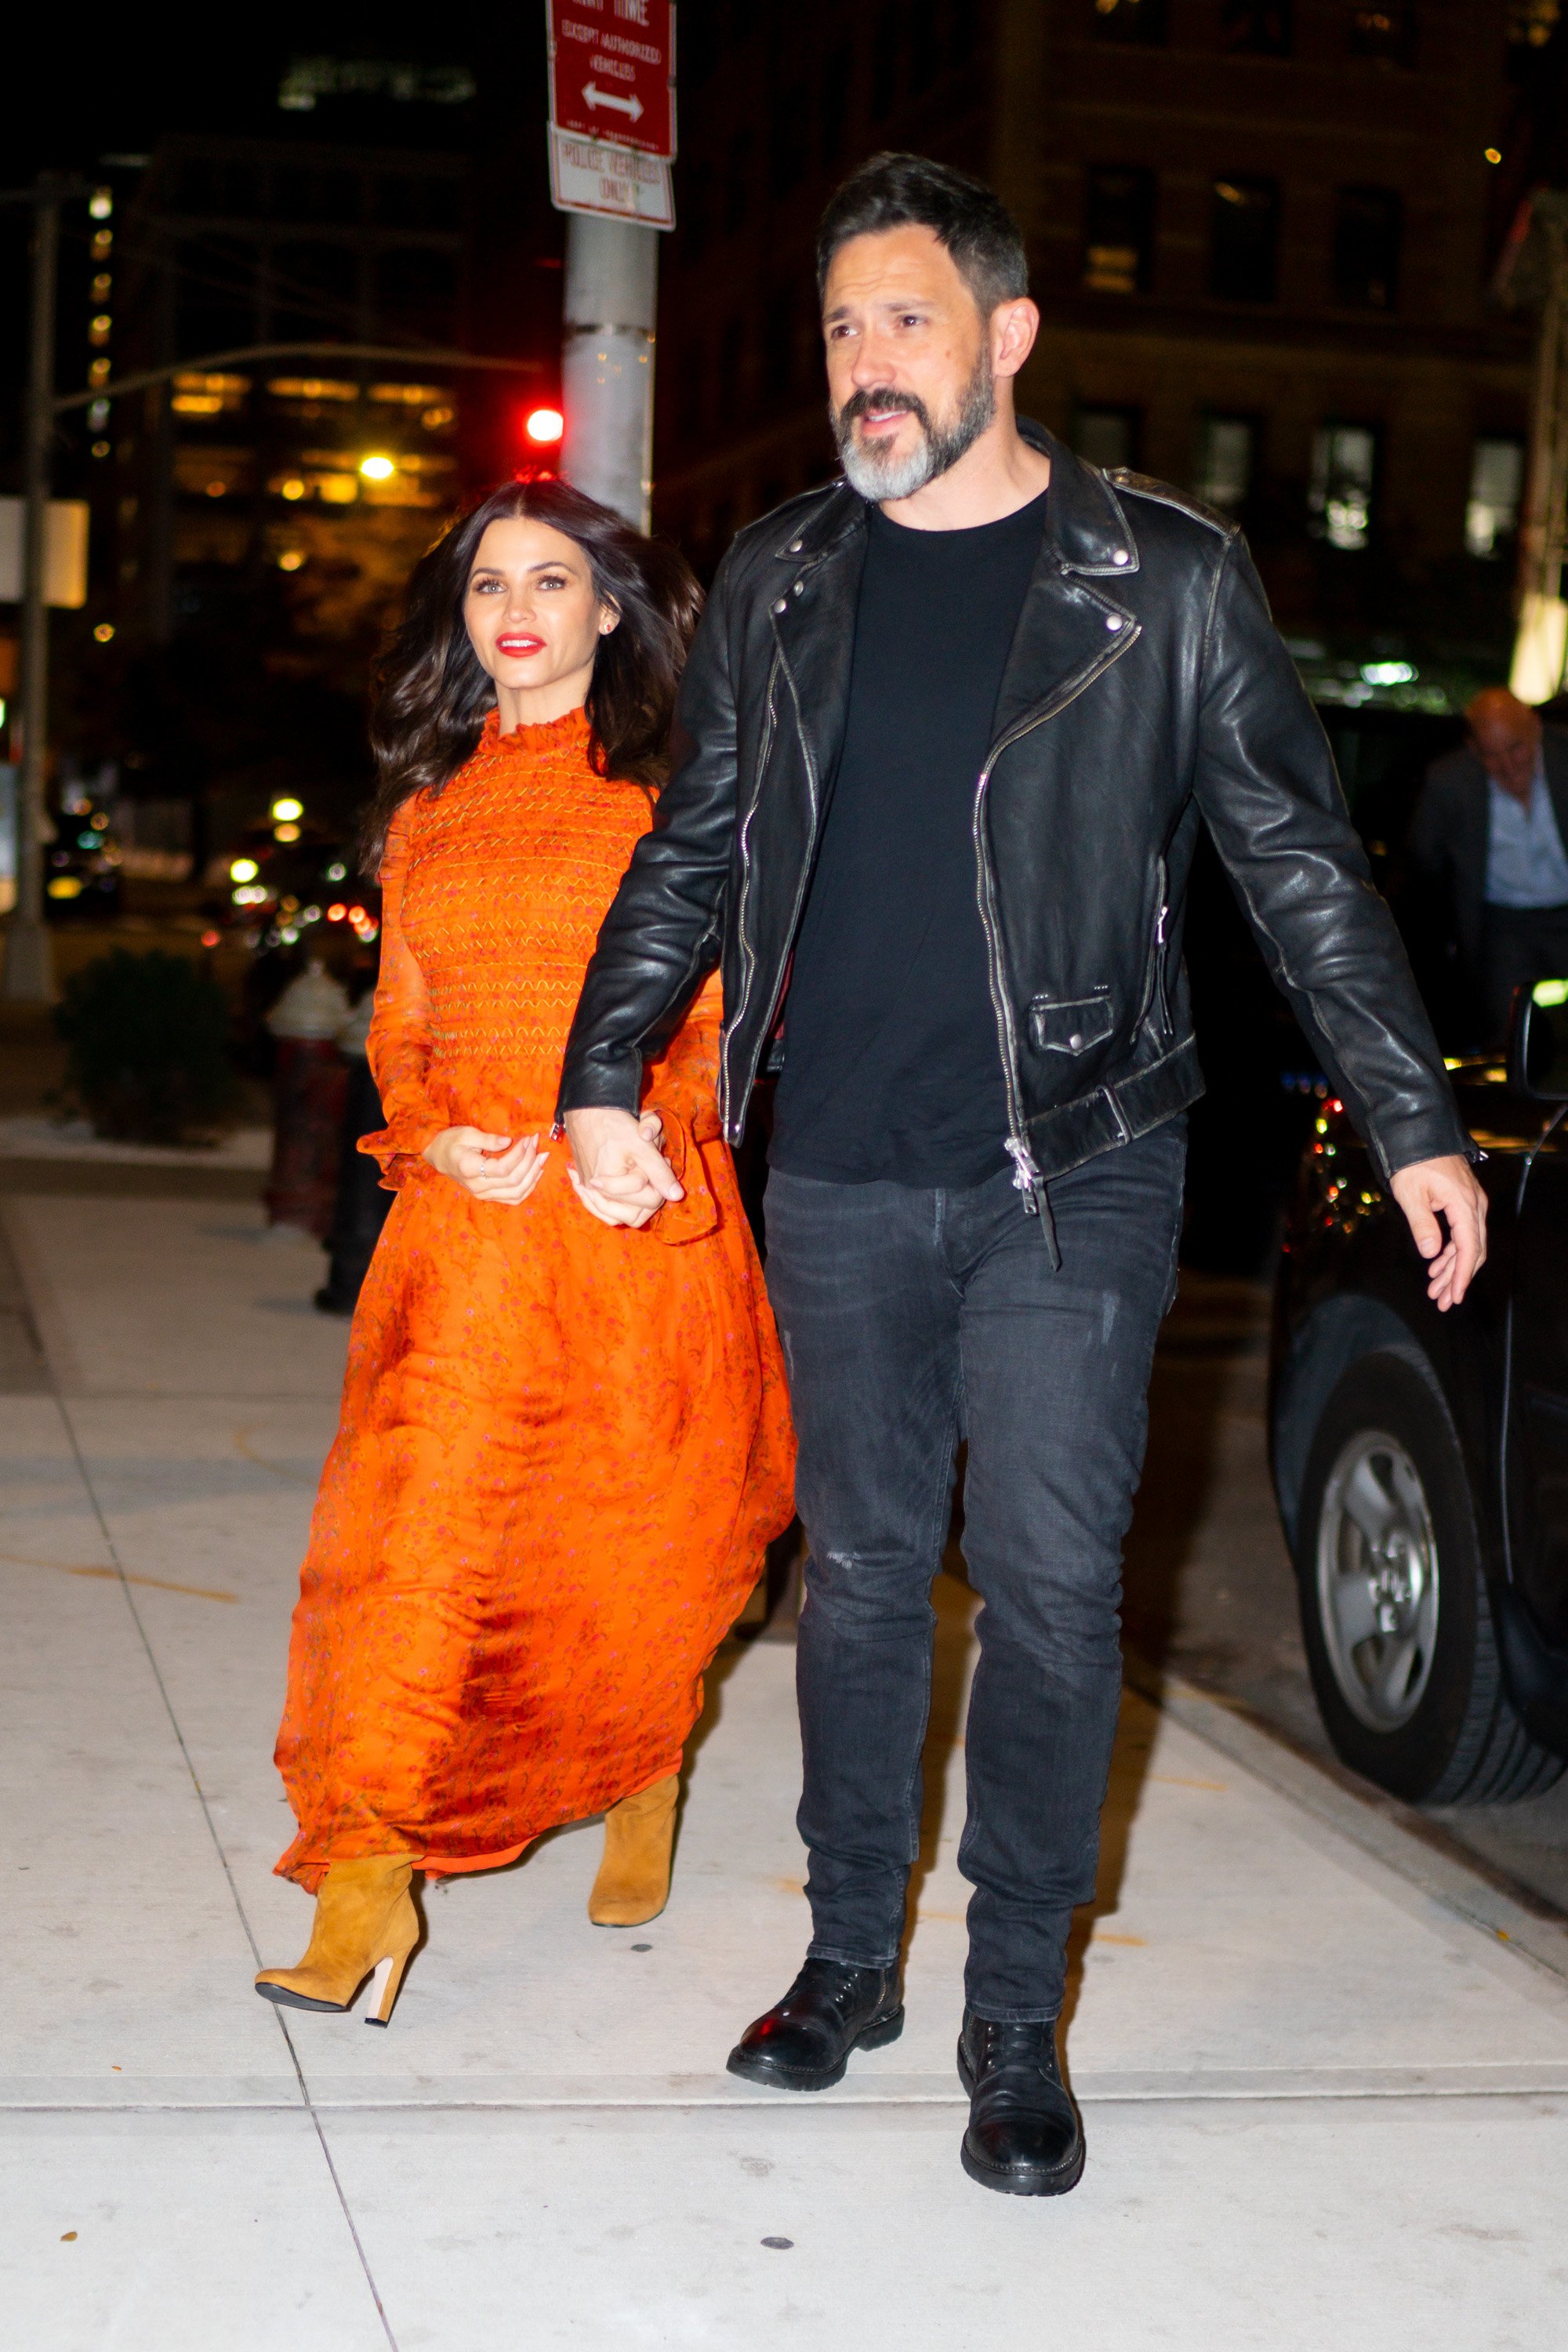 Pregnant Jenna Dewan and Steve Kazee seen out in New York together, 2019 | Photo: Getty Images 